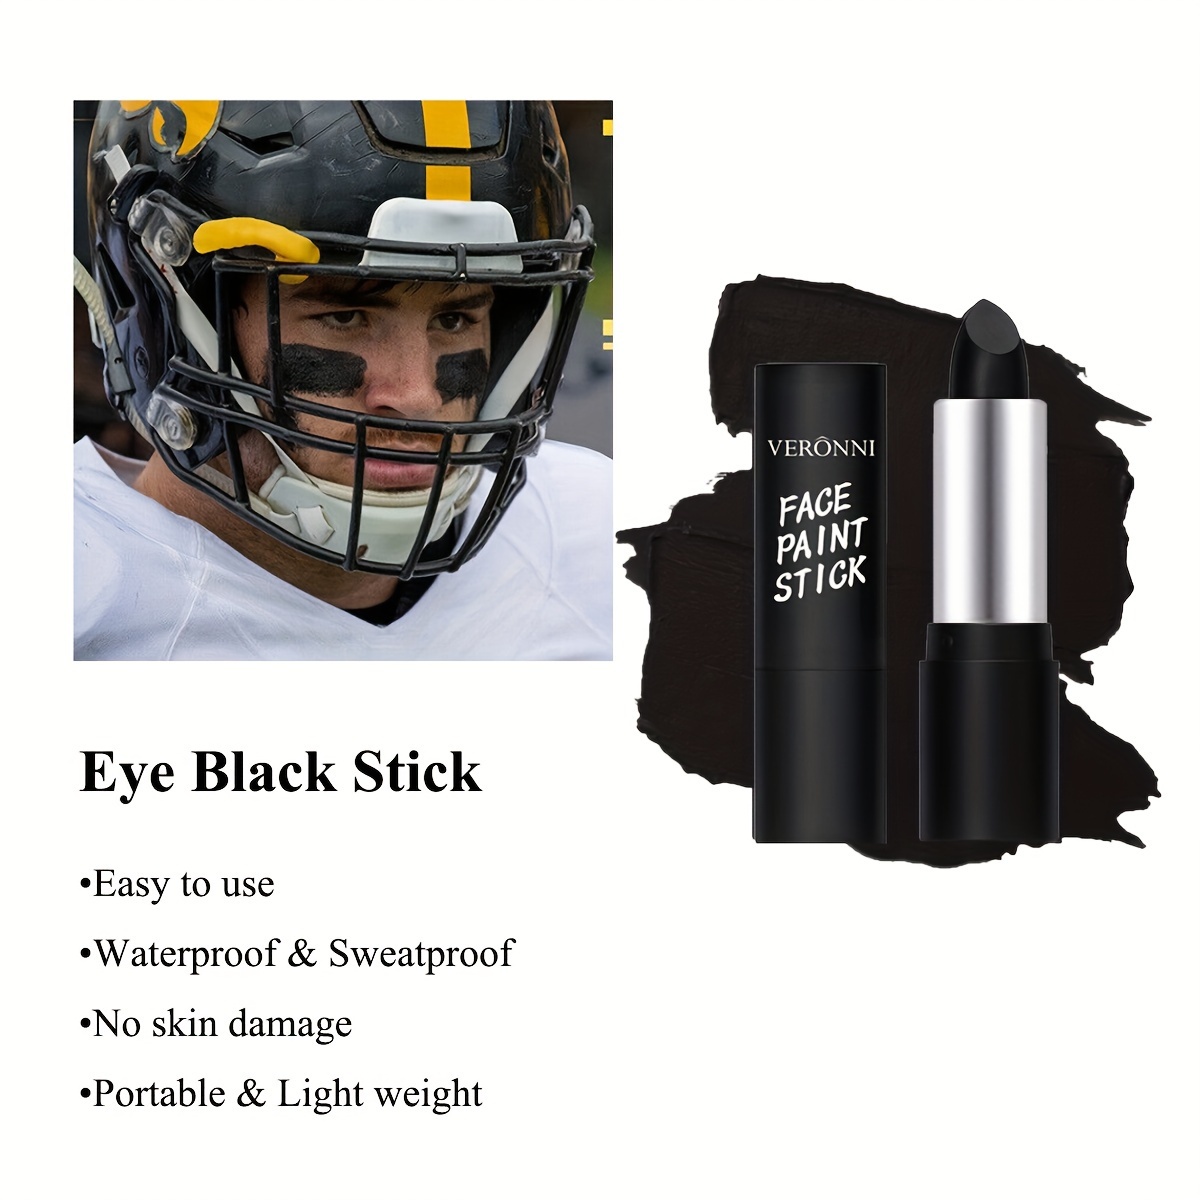 Eye Black Baseball Kits Black Face Body Paint Sticks Grease Eyeblack  Football Softball Accessories for athletes Halloween SFX Special Effects  Cosplay Costume Parties Makeup 20PCS Black